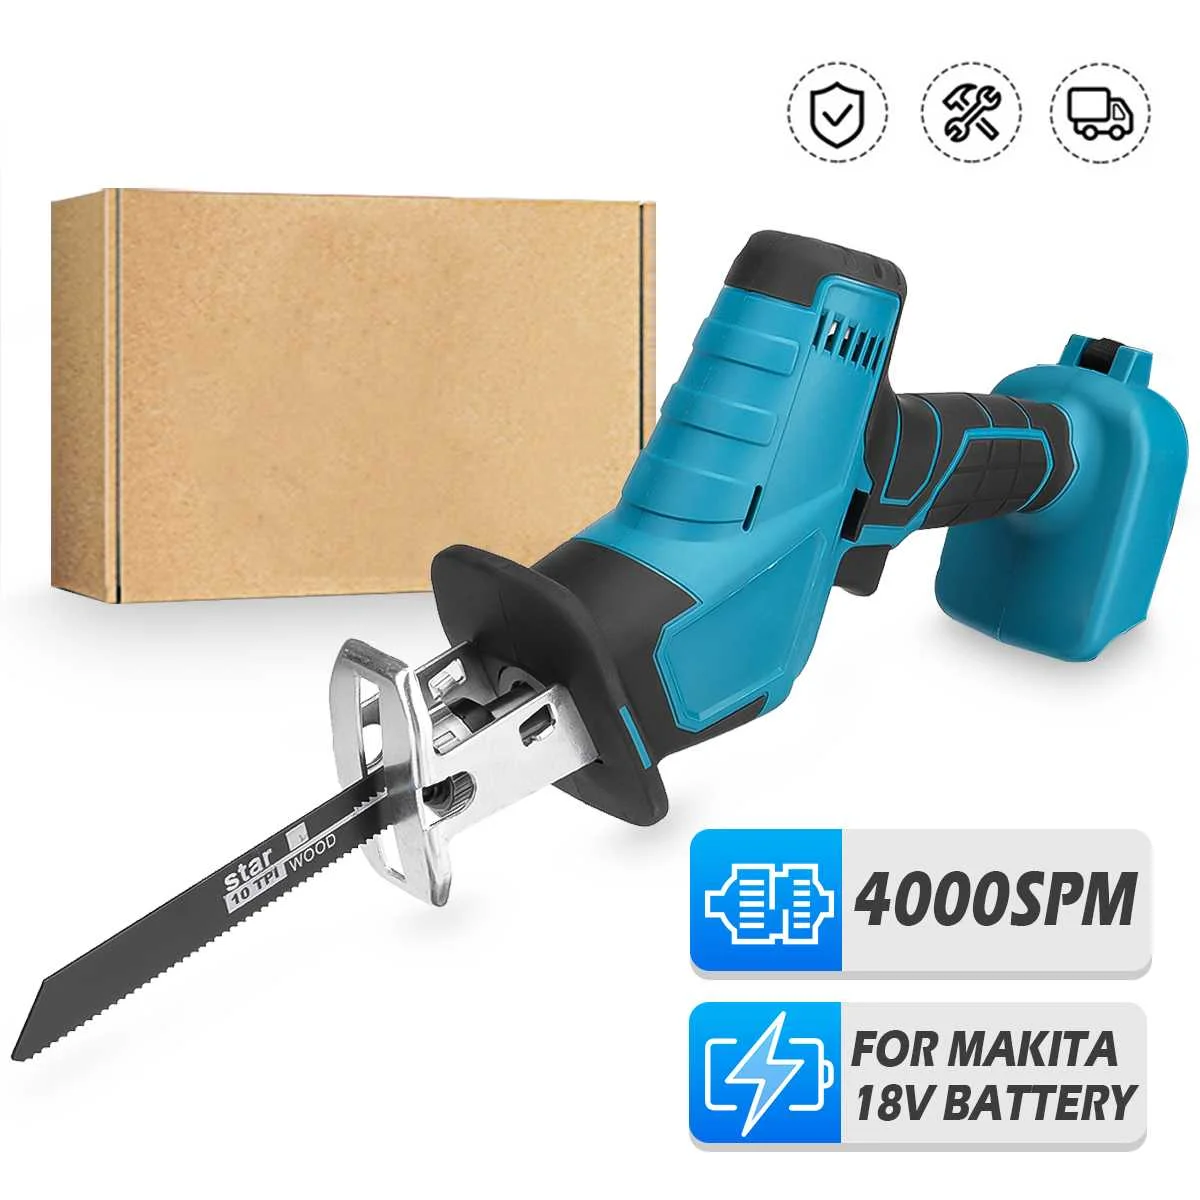 

18V Electric Cordless Reciprocating Saw Only 4pc Blade and Saw Without Battery Matal Wood Cutting Tool for Makita 18V Battery